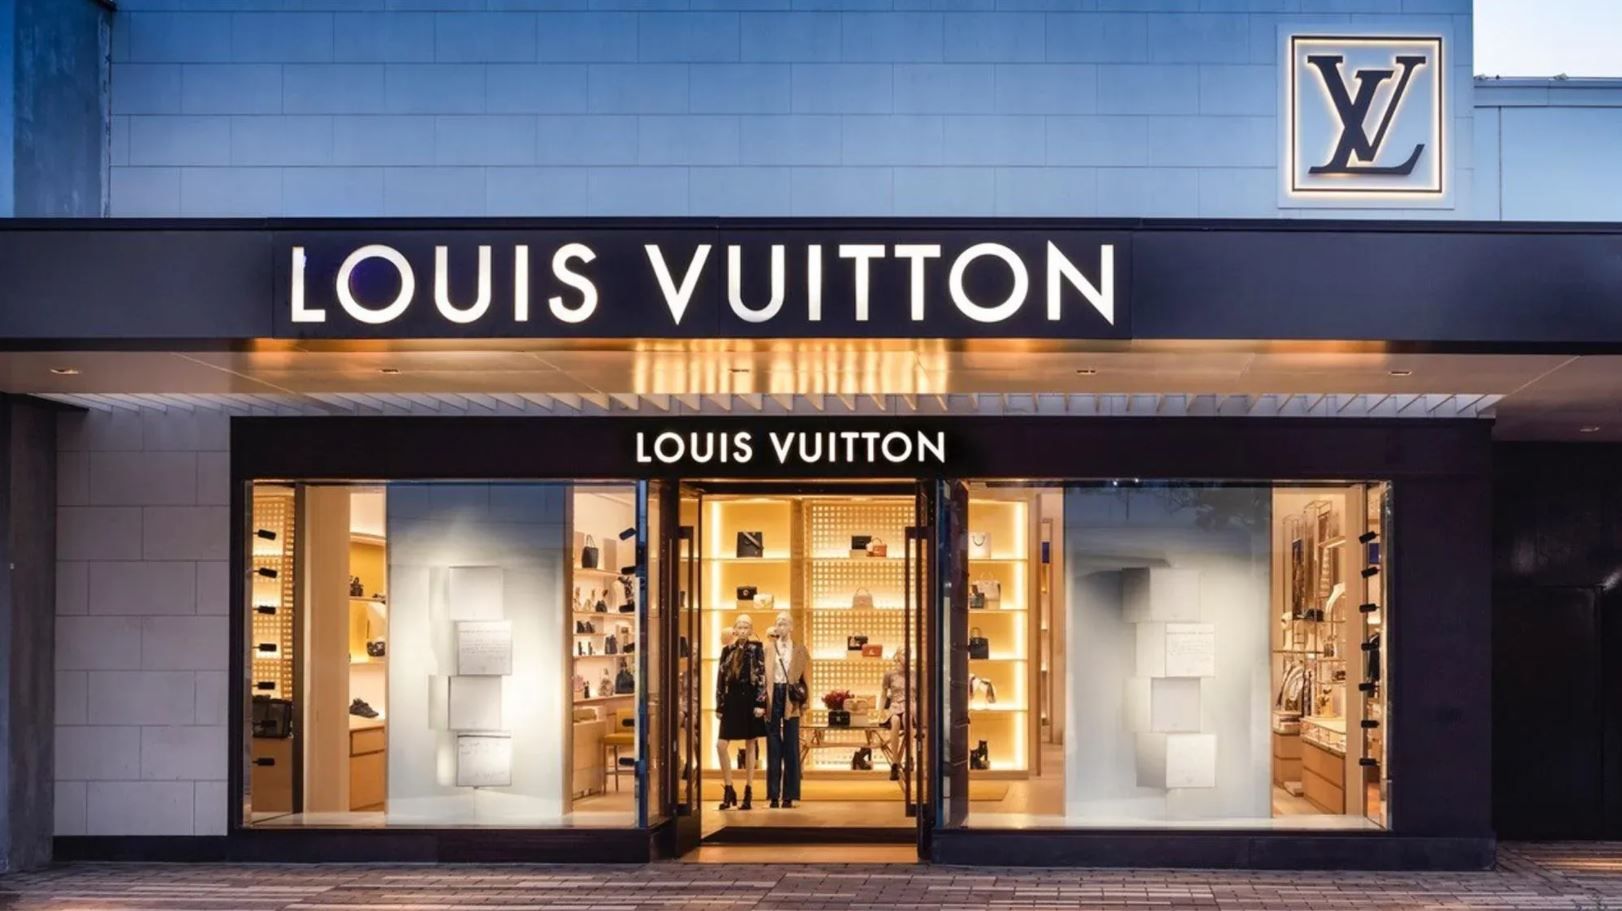 Louis Vuitton store at the Oakbrook Mall robbed again, this time by 14 suspects